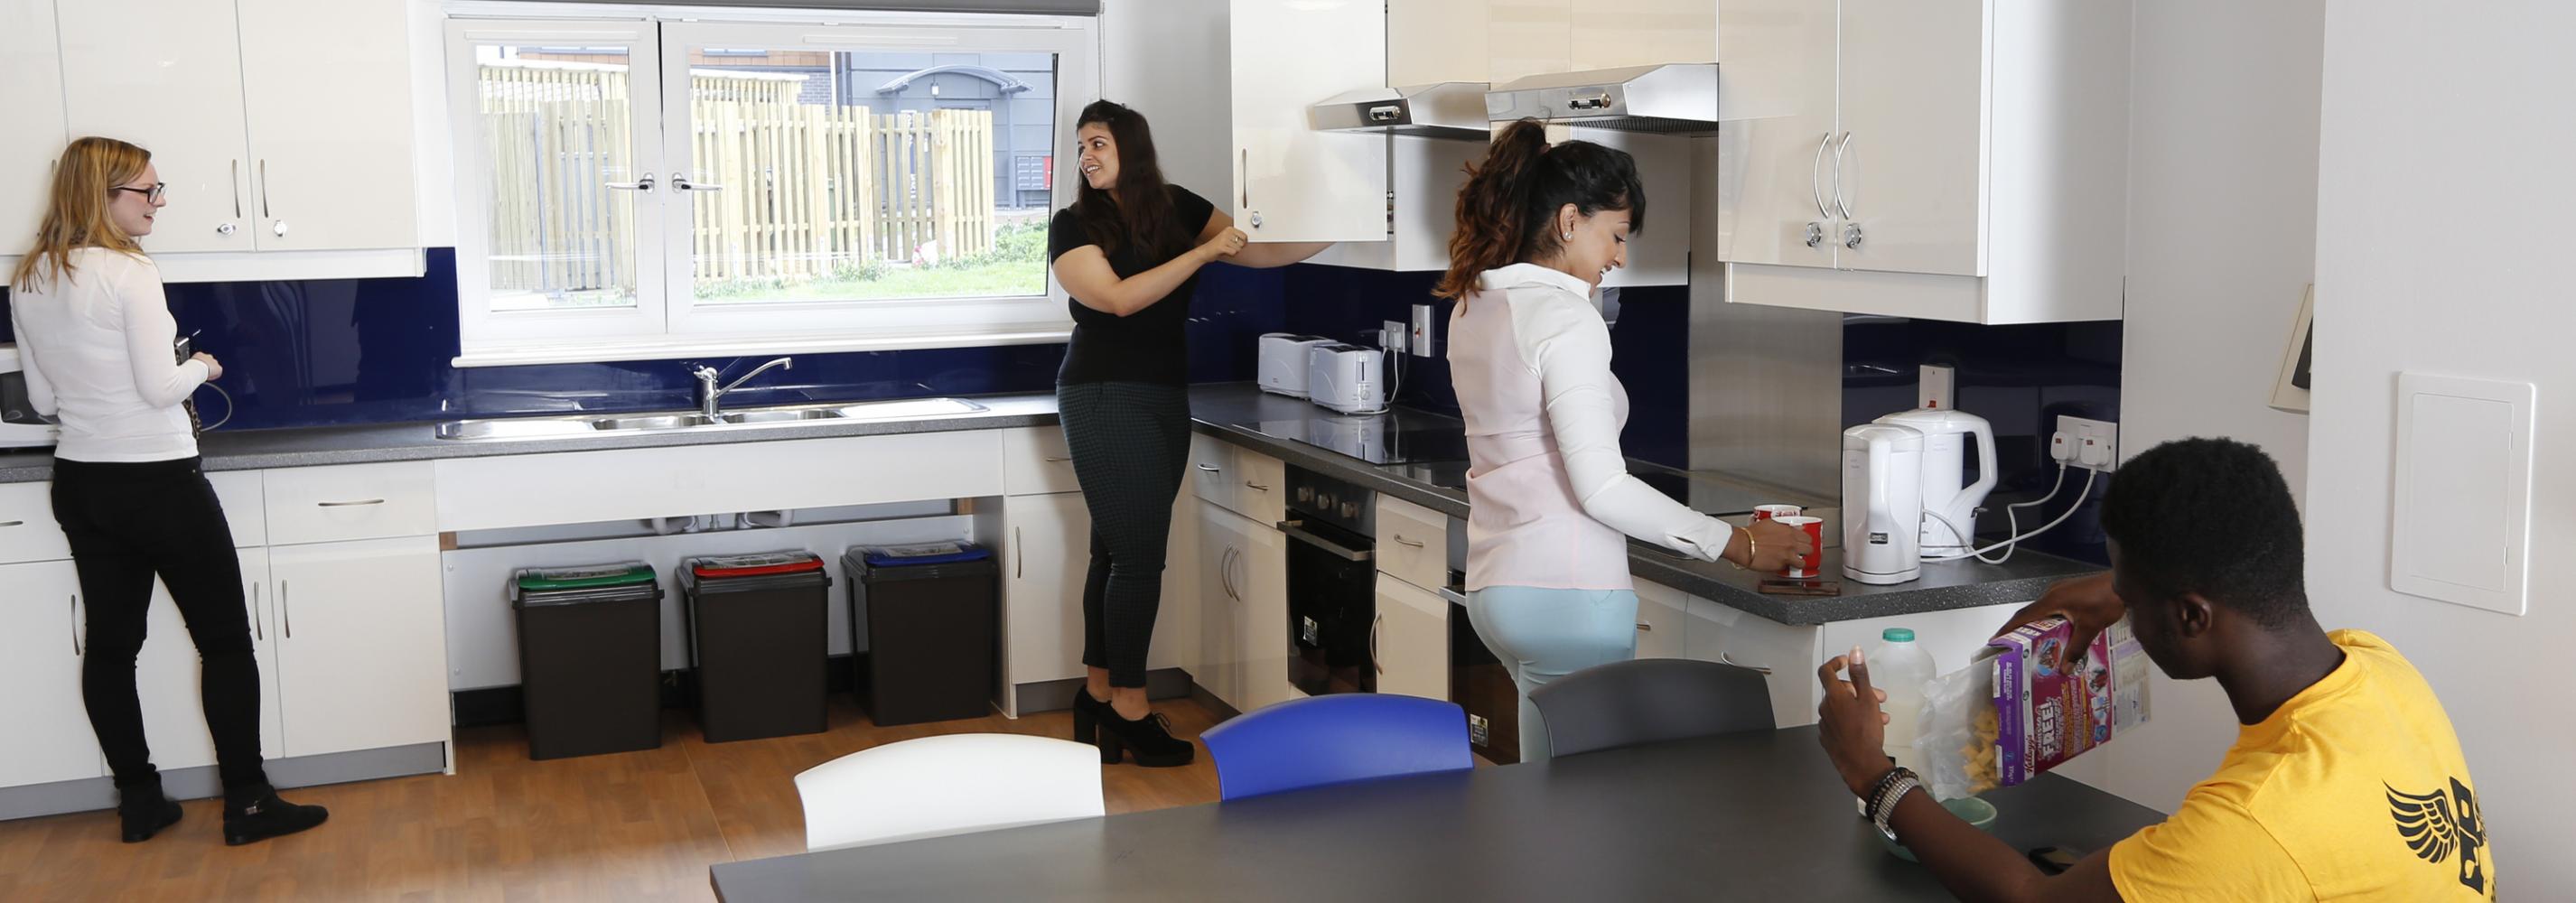 Students in a kitchen on College Lane campus